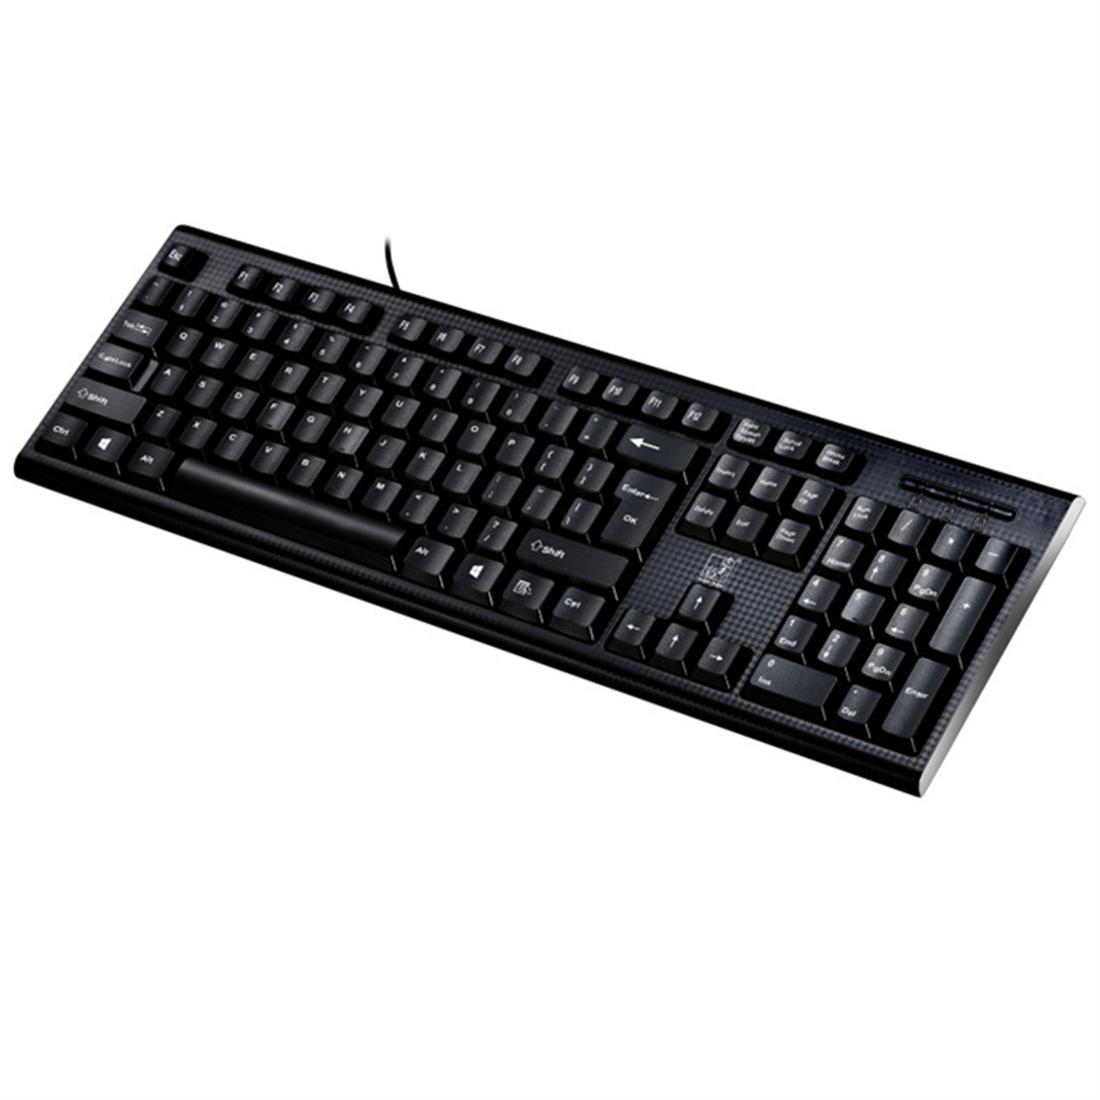 Q9 KEYBOARD AND MOUSE